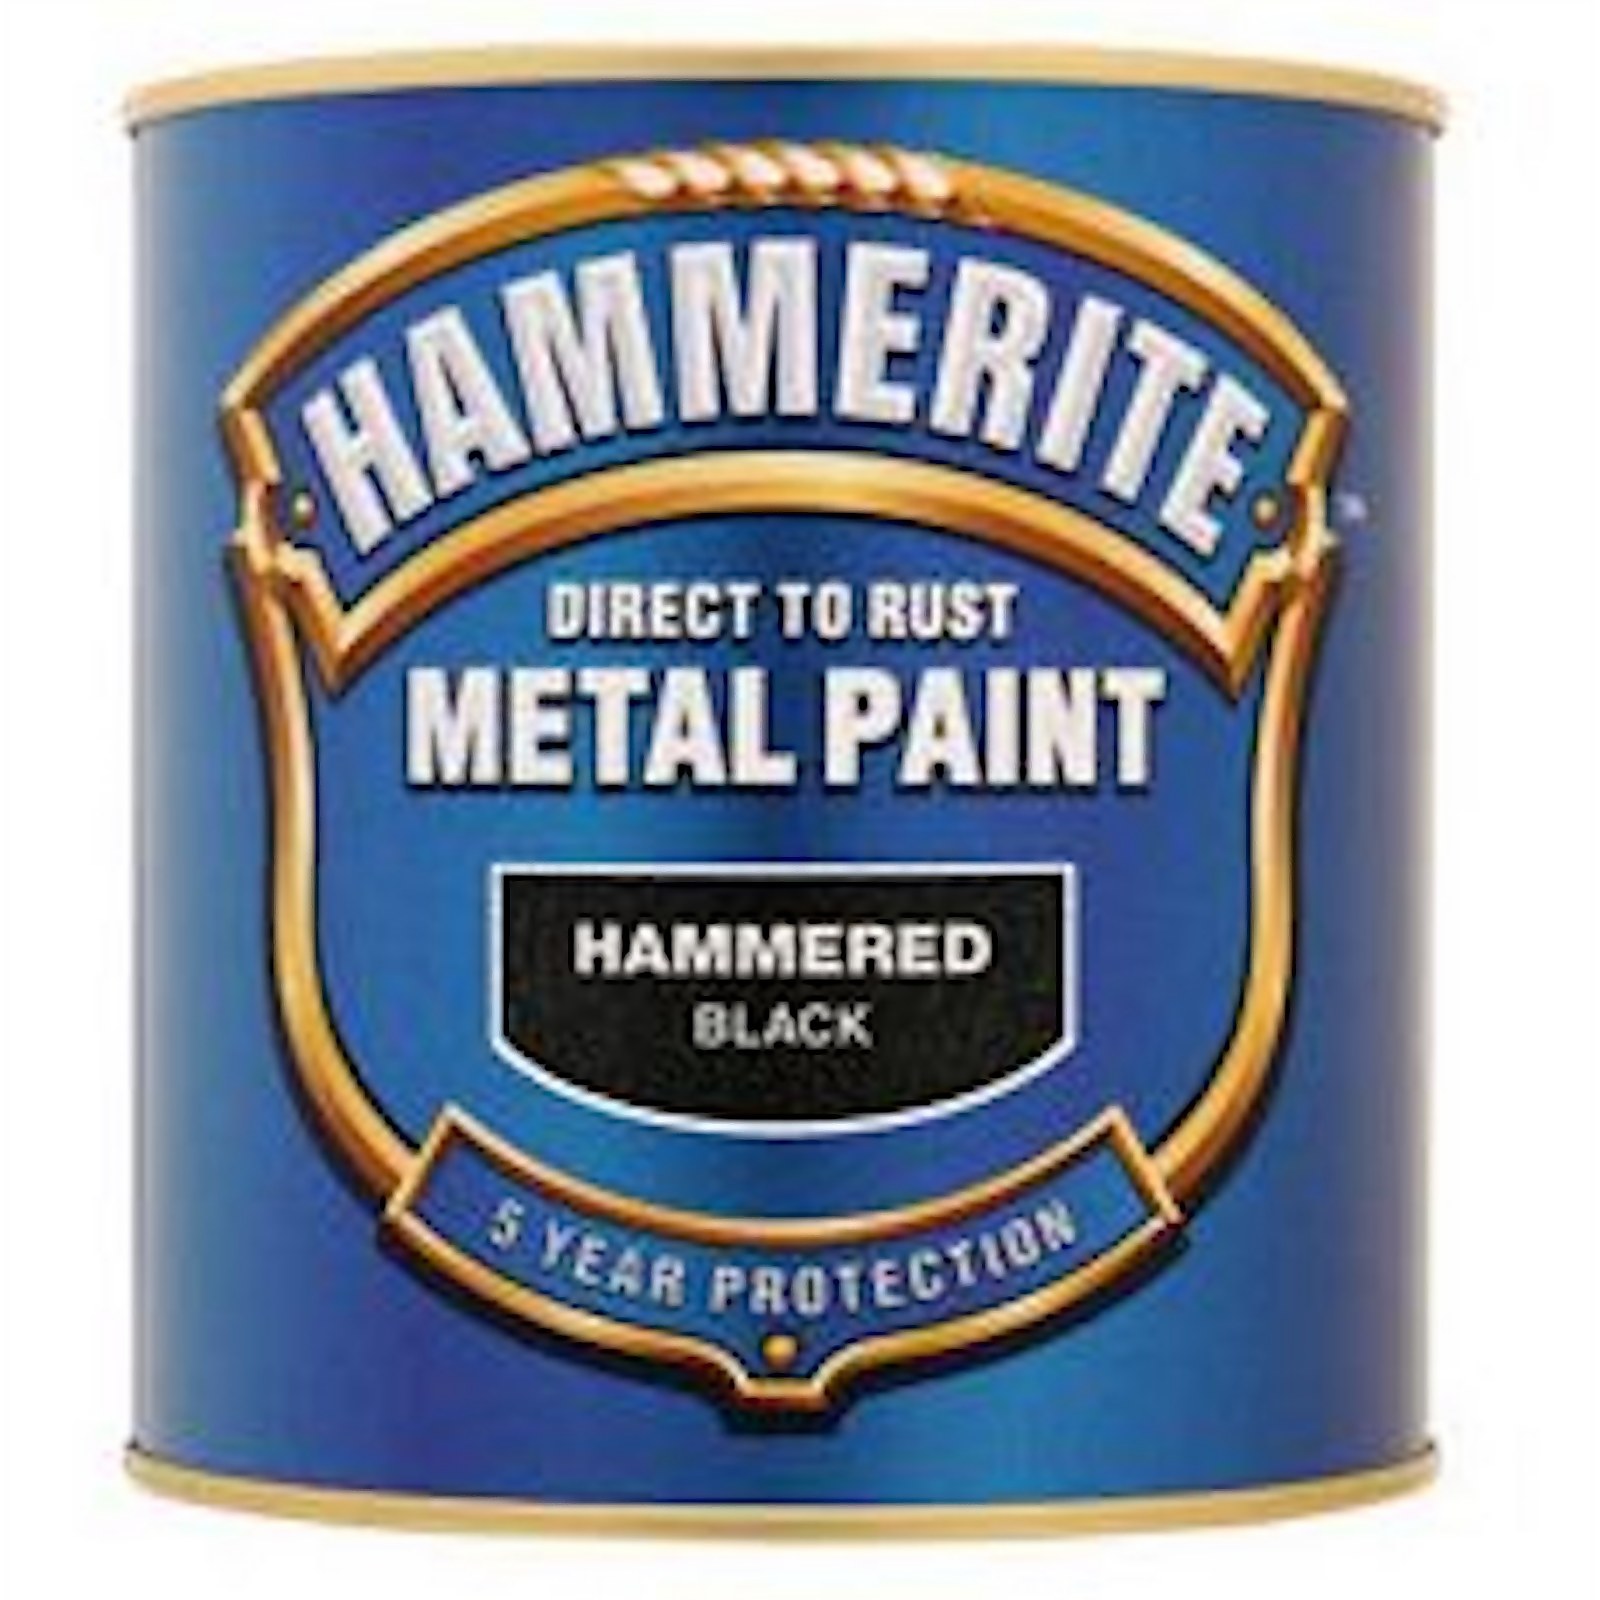 Photo of Hammerite Gold - Hammered Exterior Metal Paint - 250ml